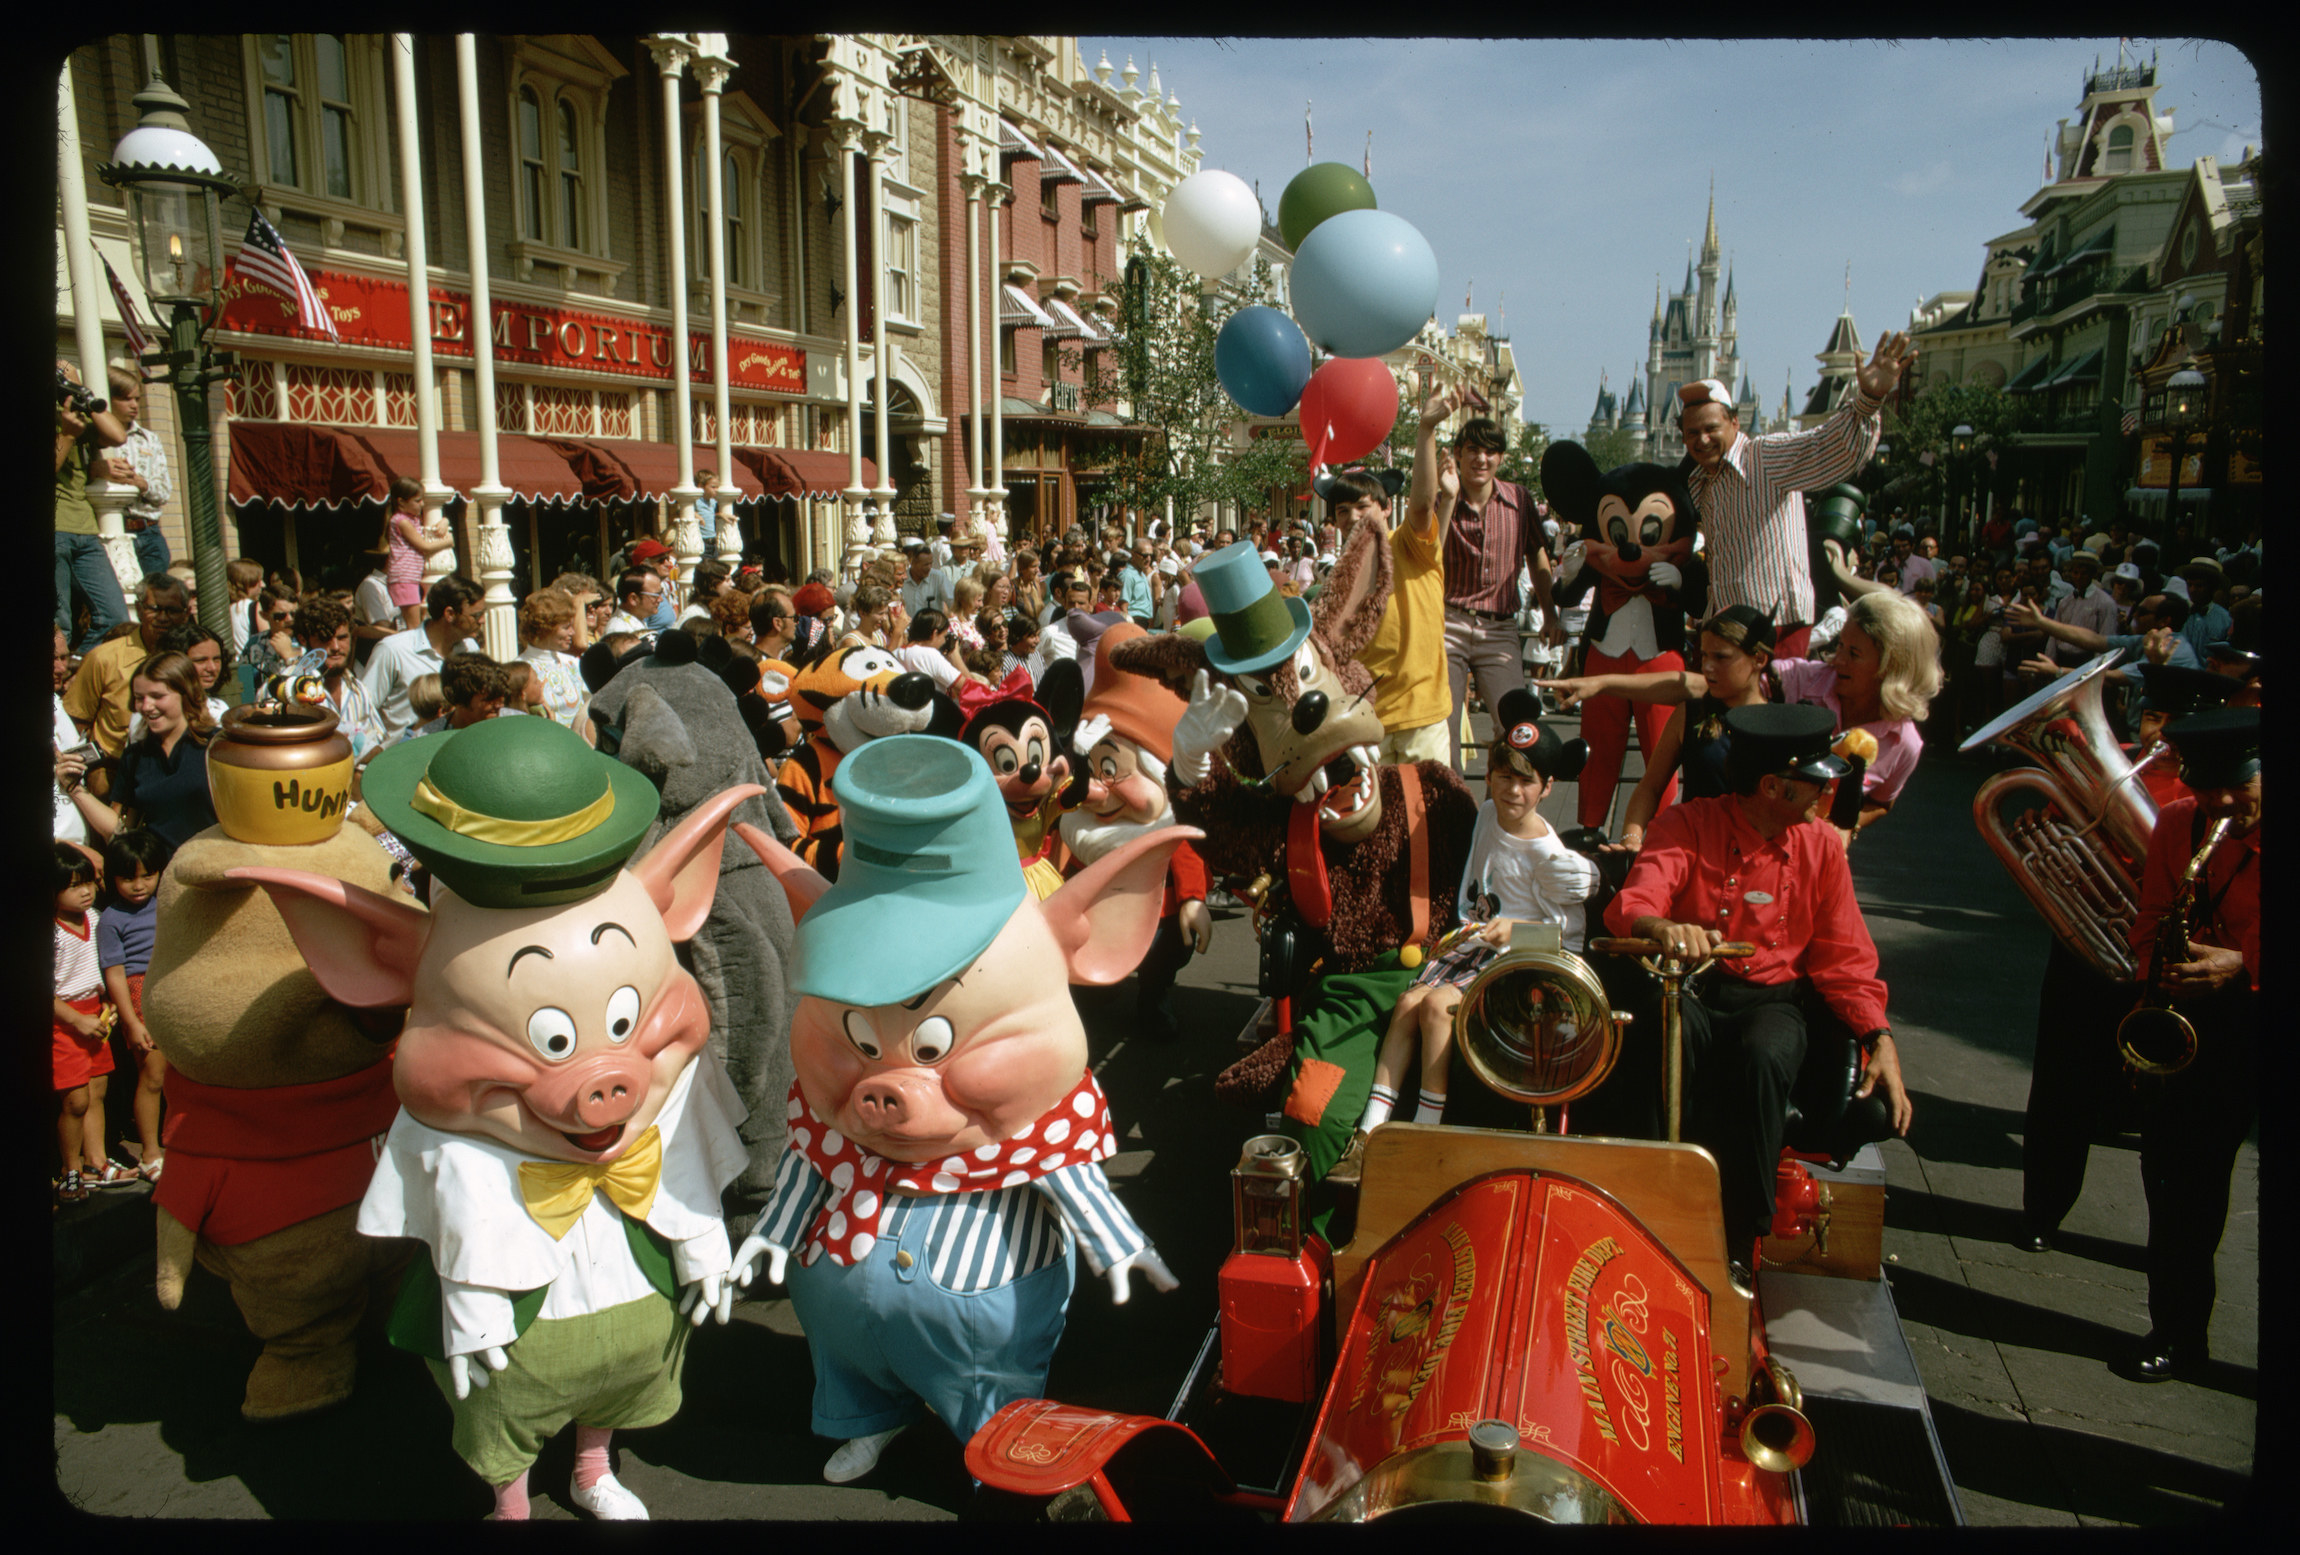 Disney characters and tourists fill a street in a parade